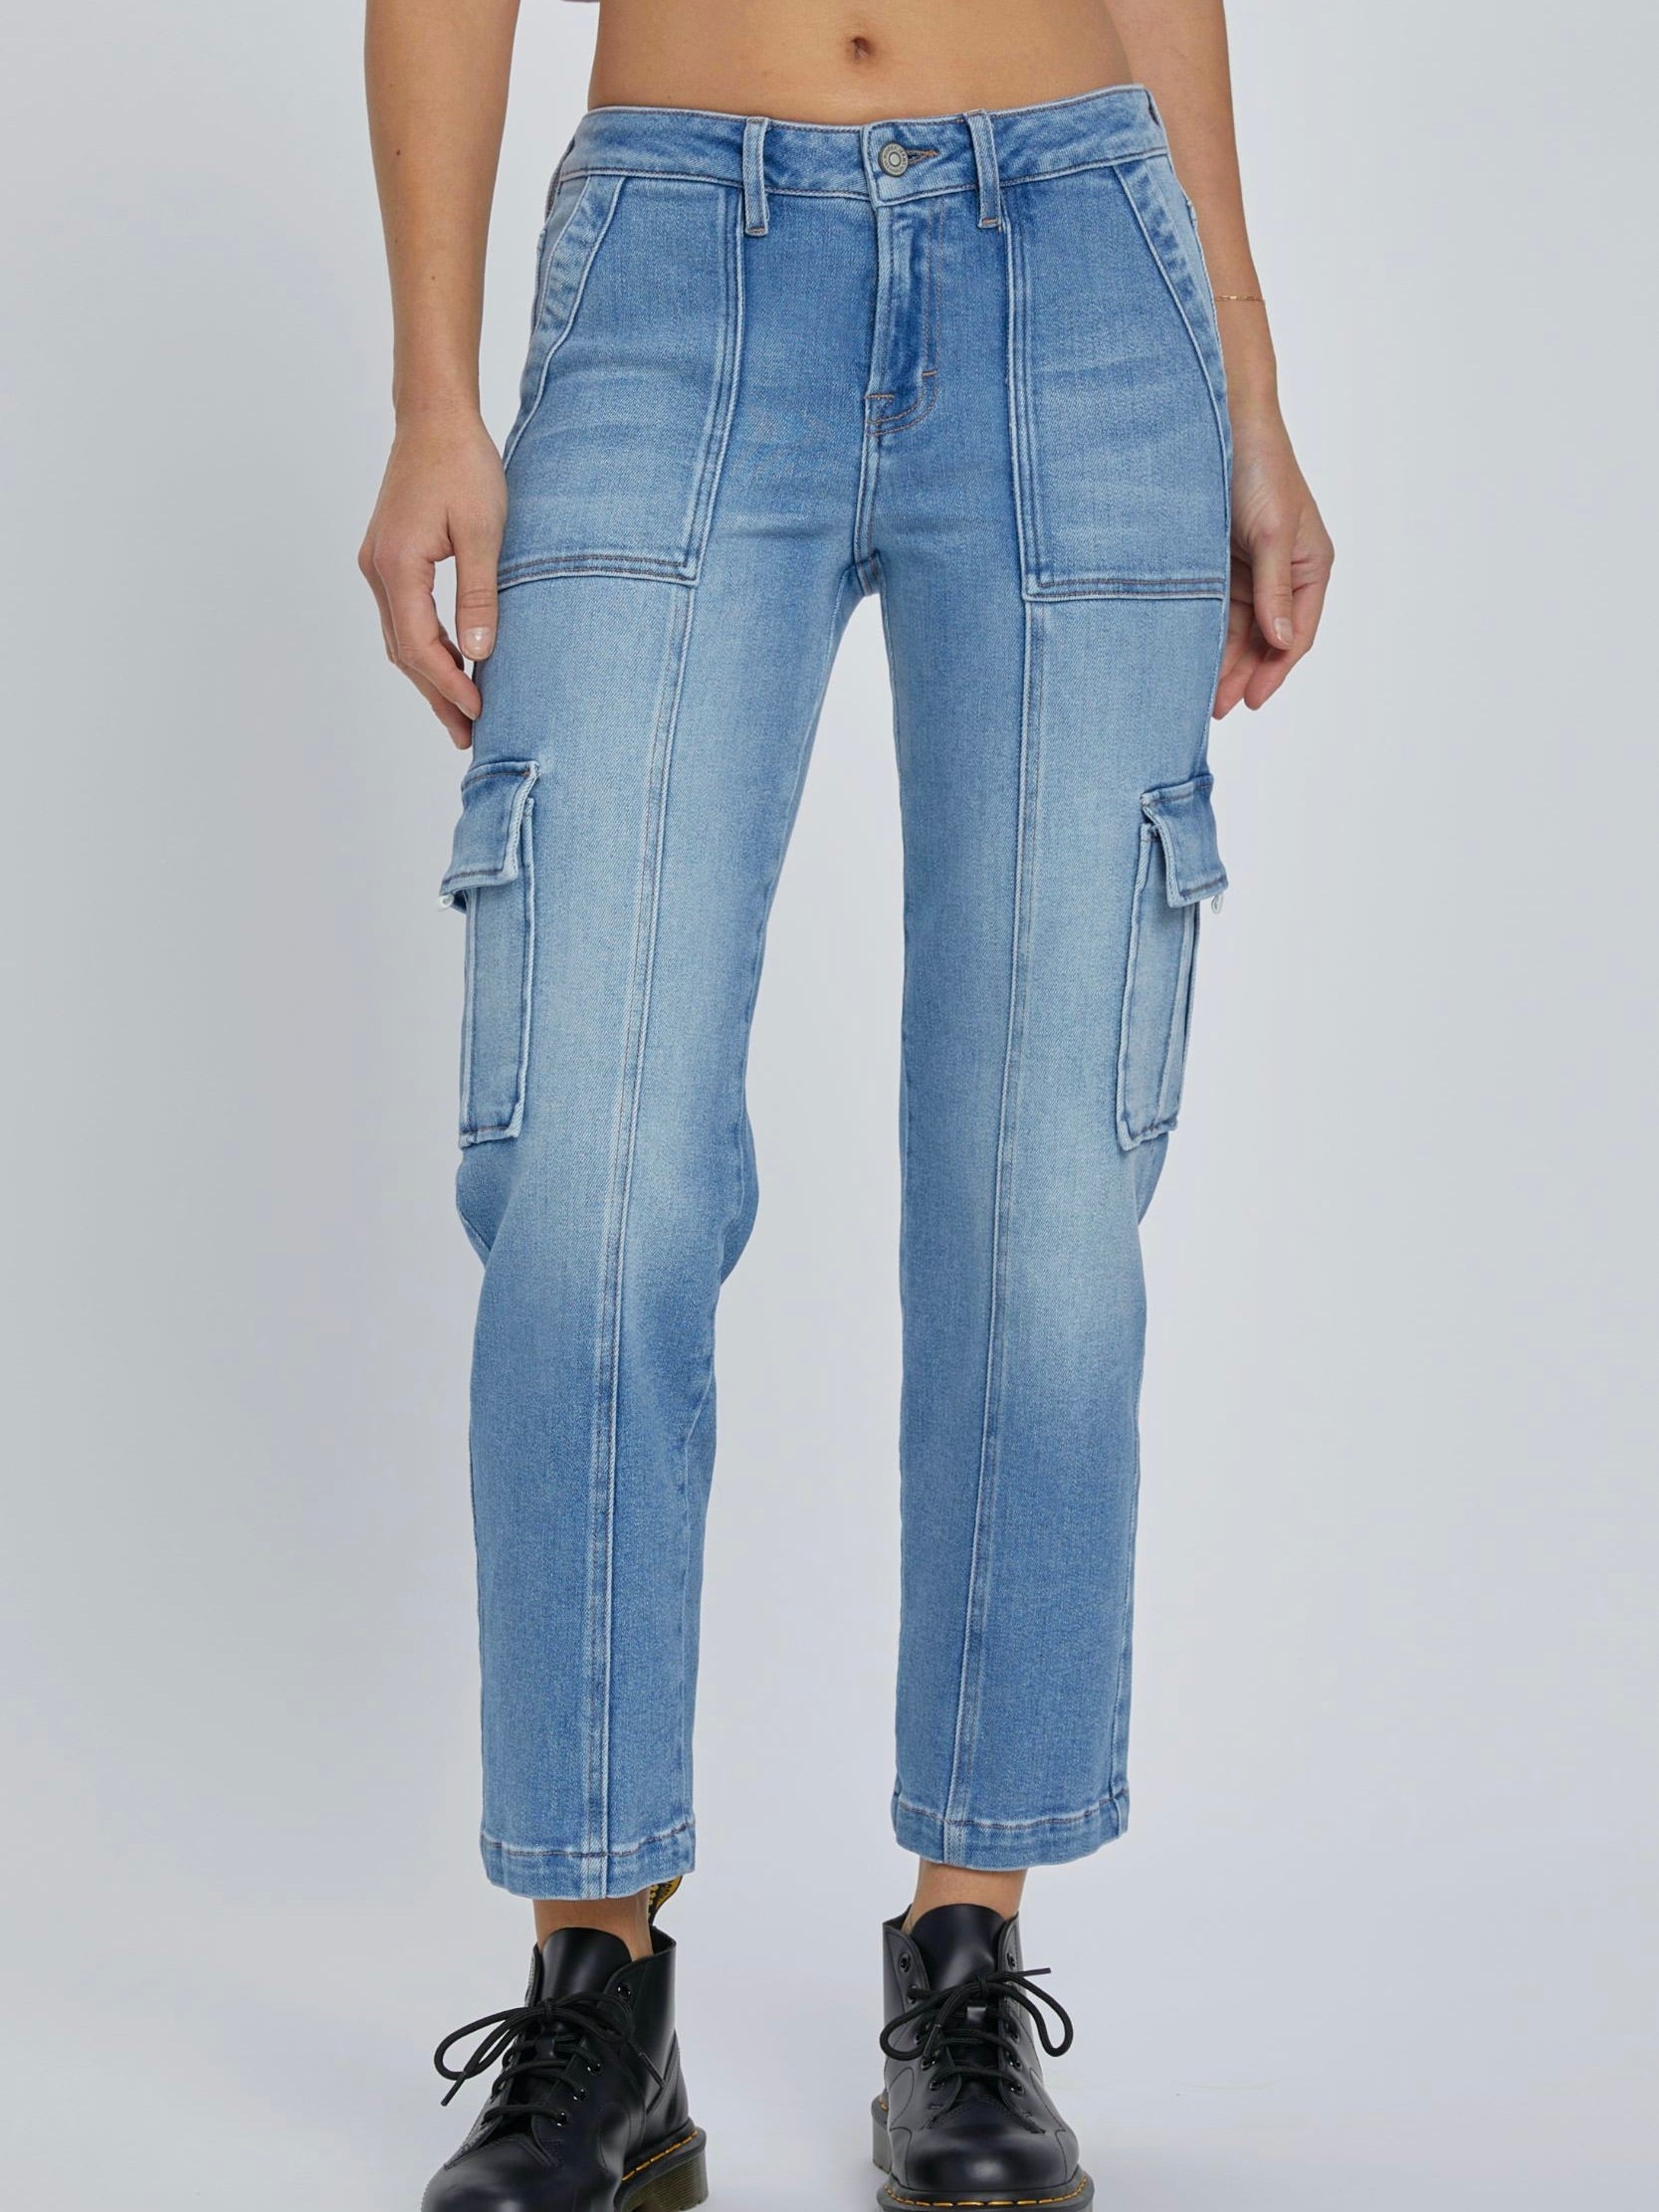 Hidden Jeans : Tracey Cropped Cargo